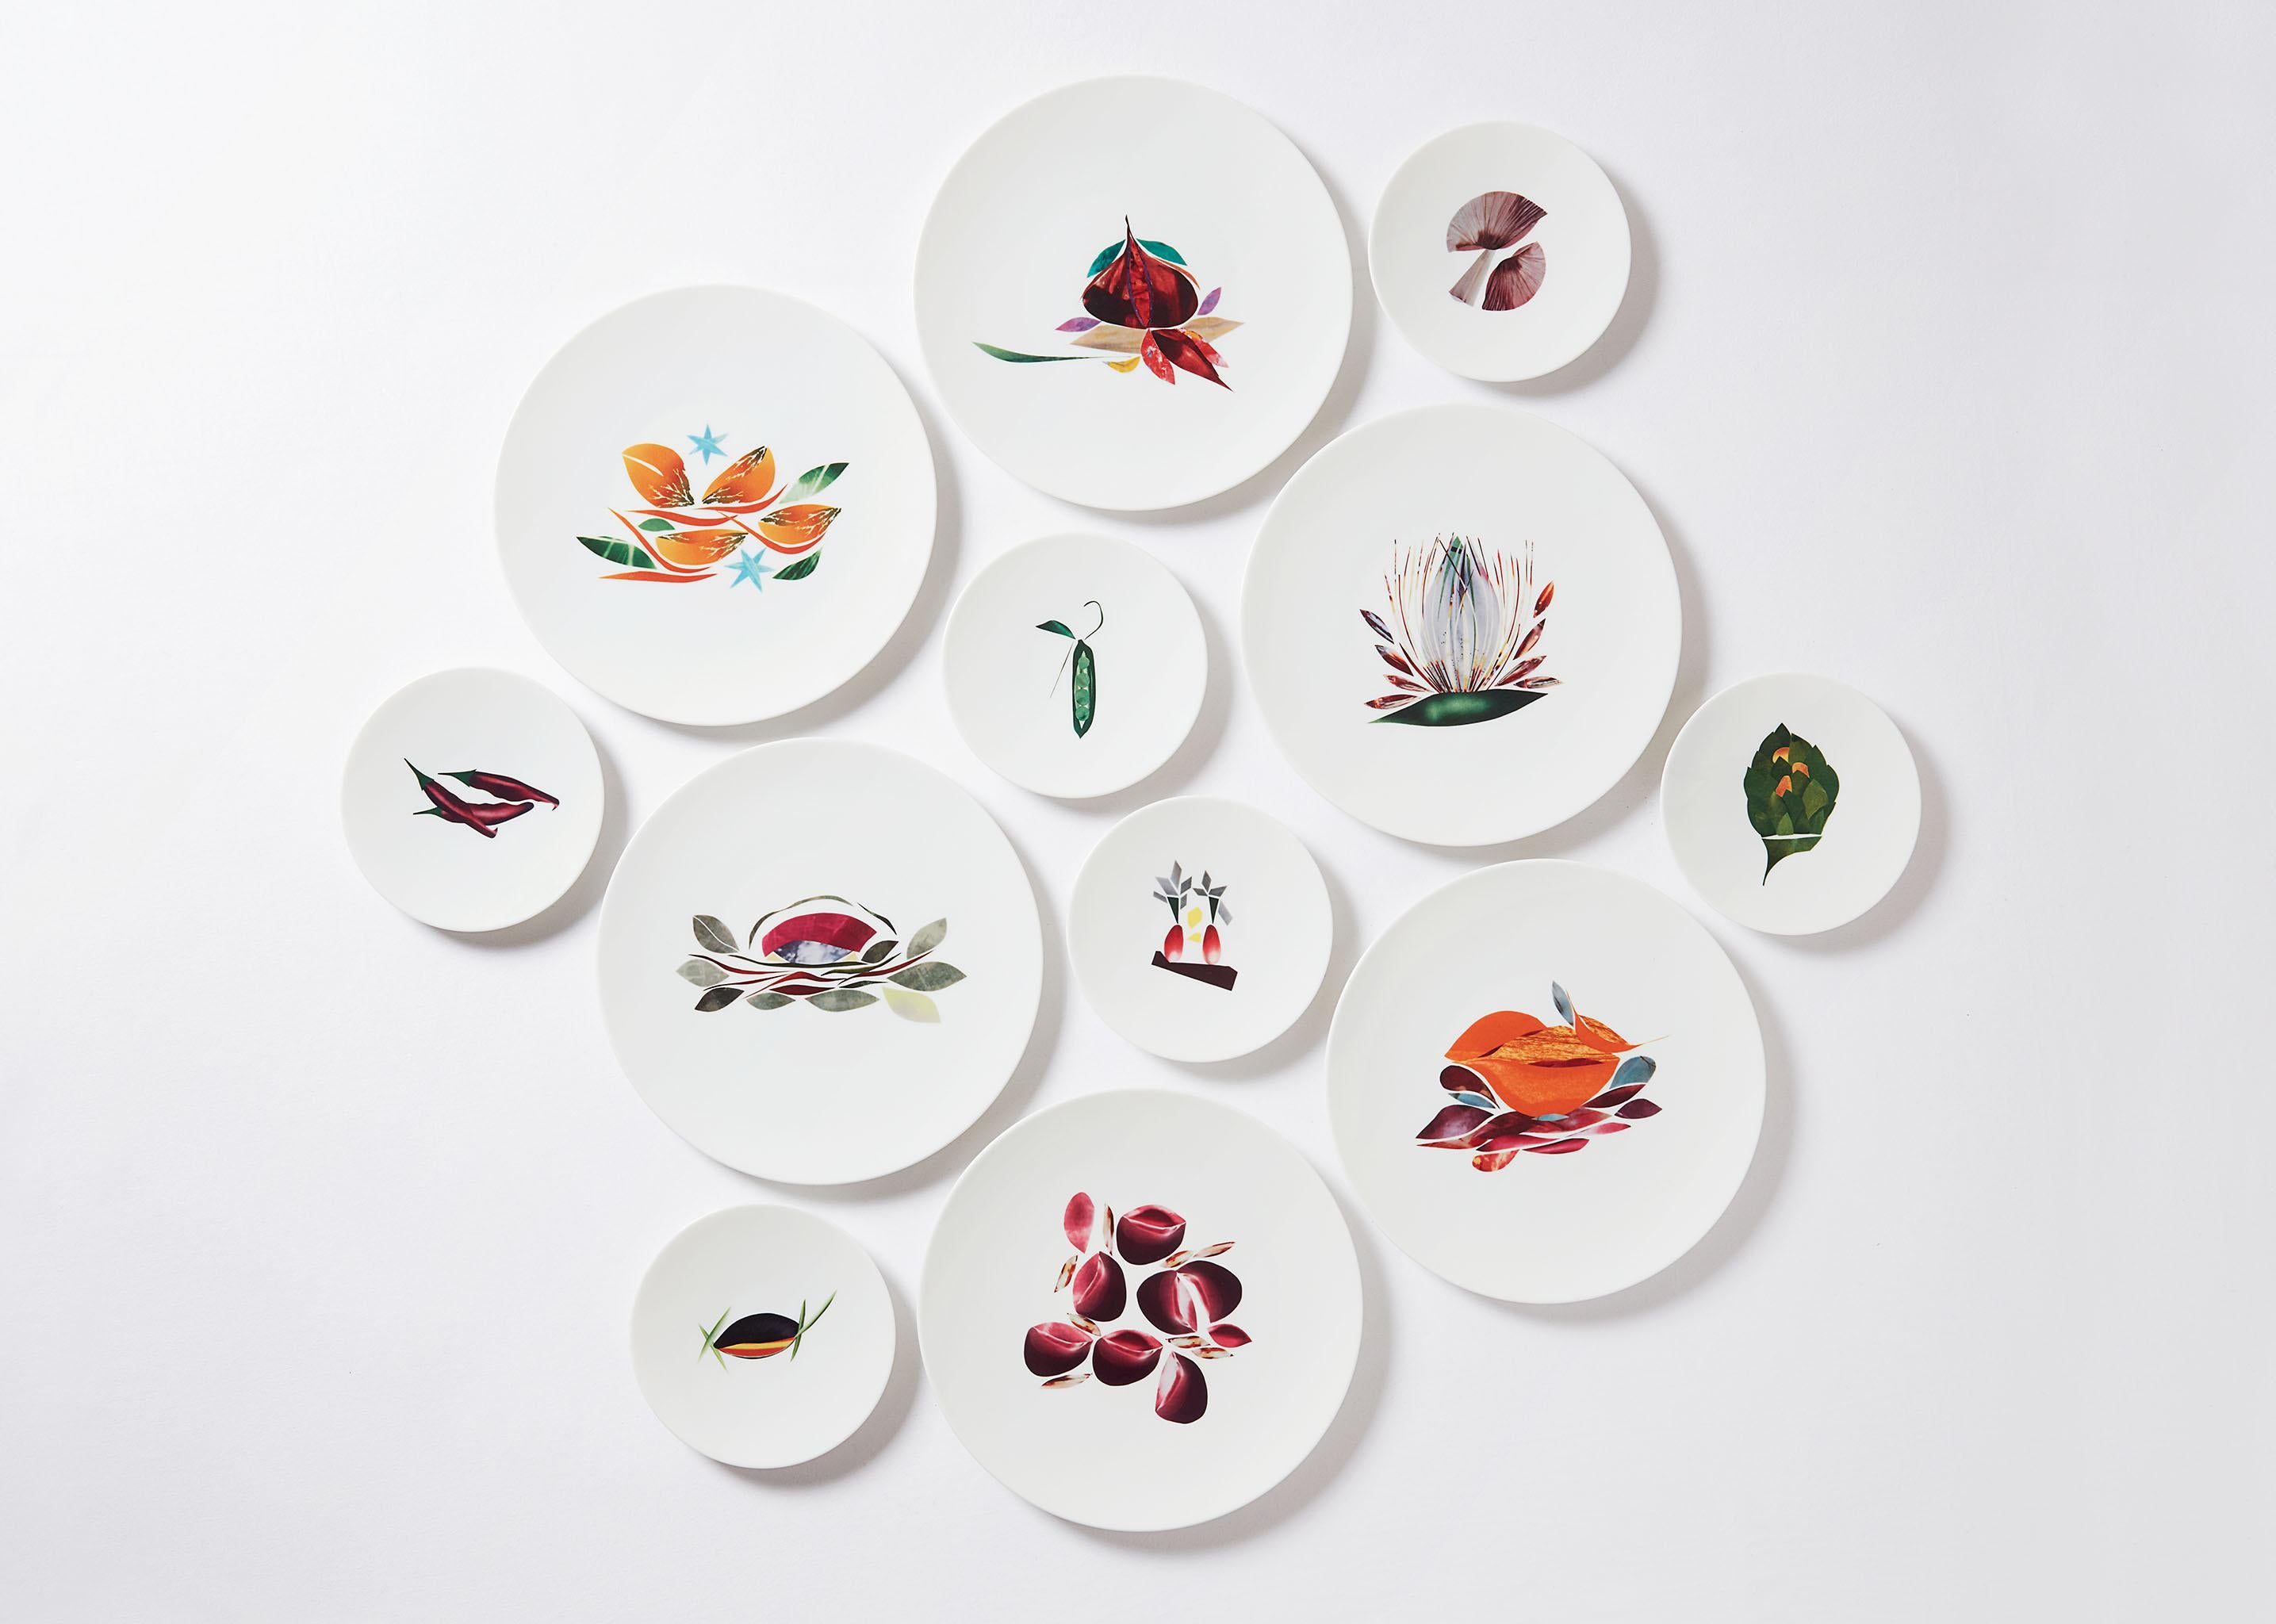 Bread Porcelain Plate By The Chef Alain Passard Model 